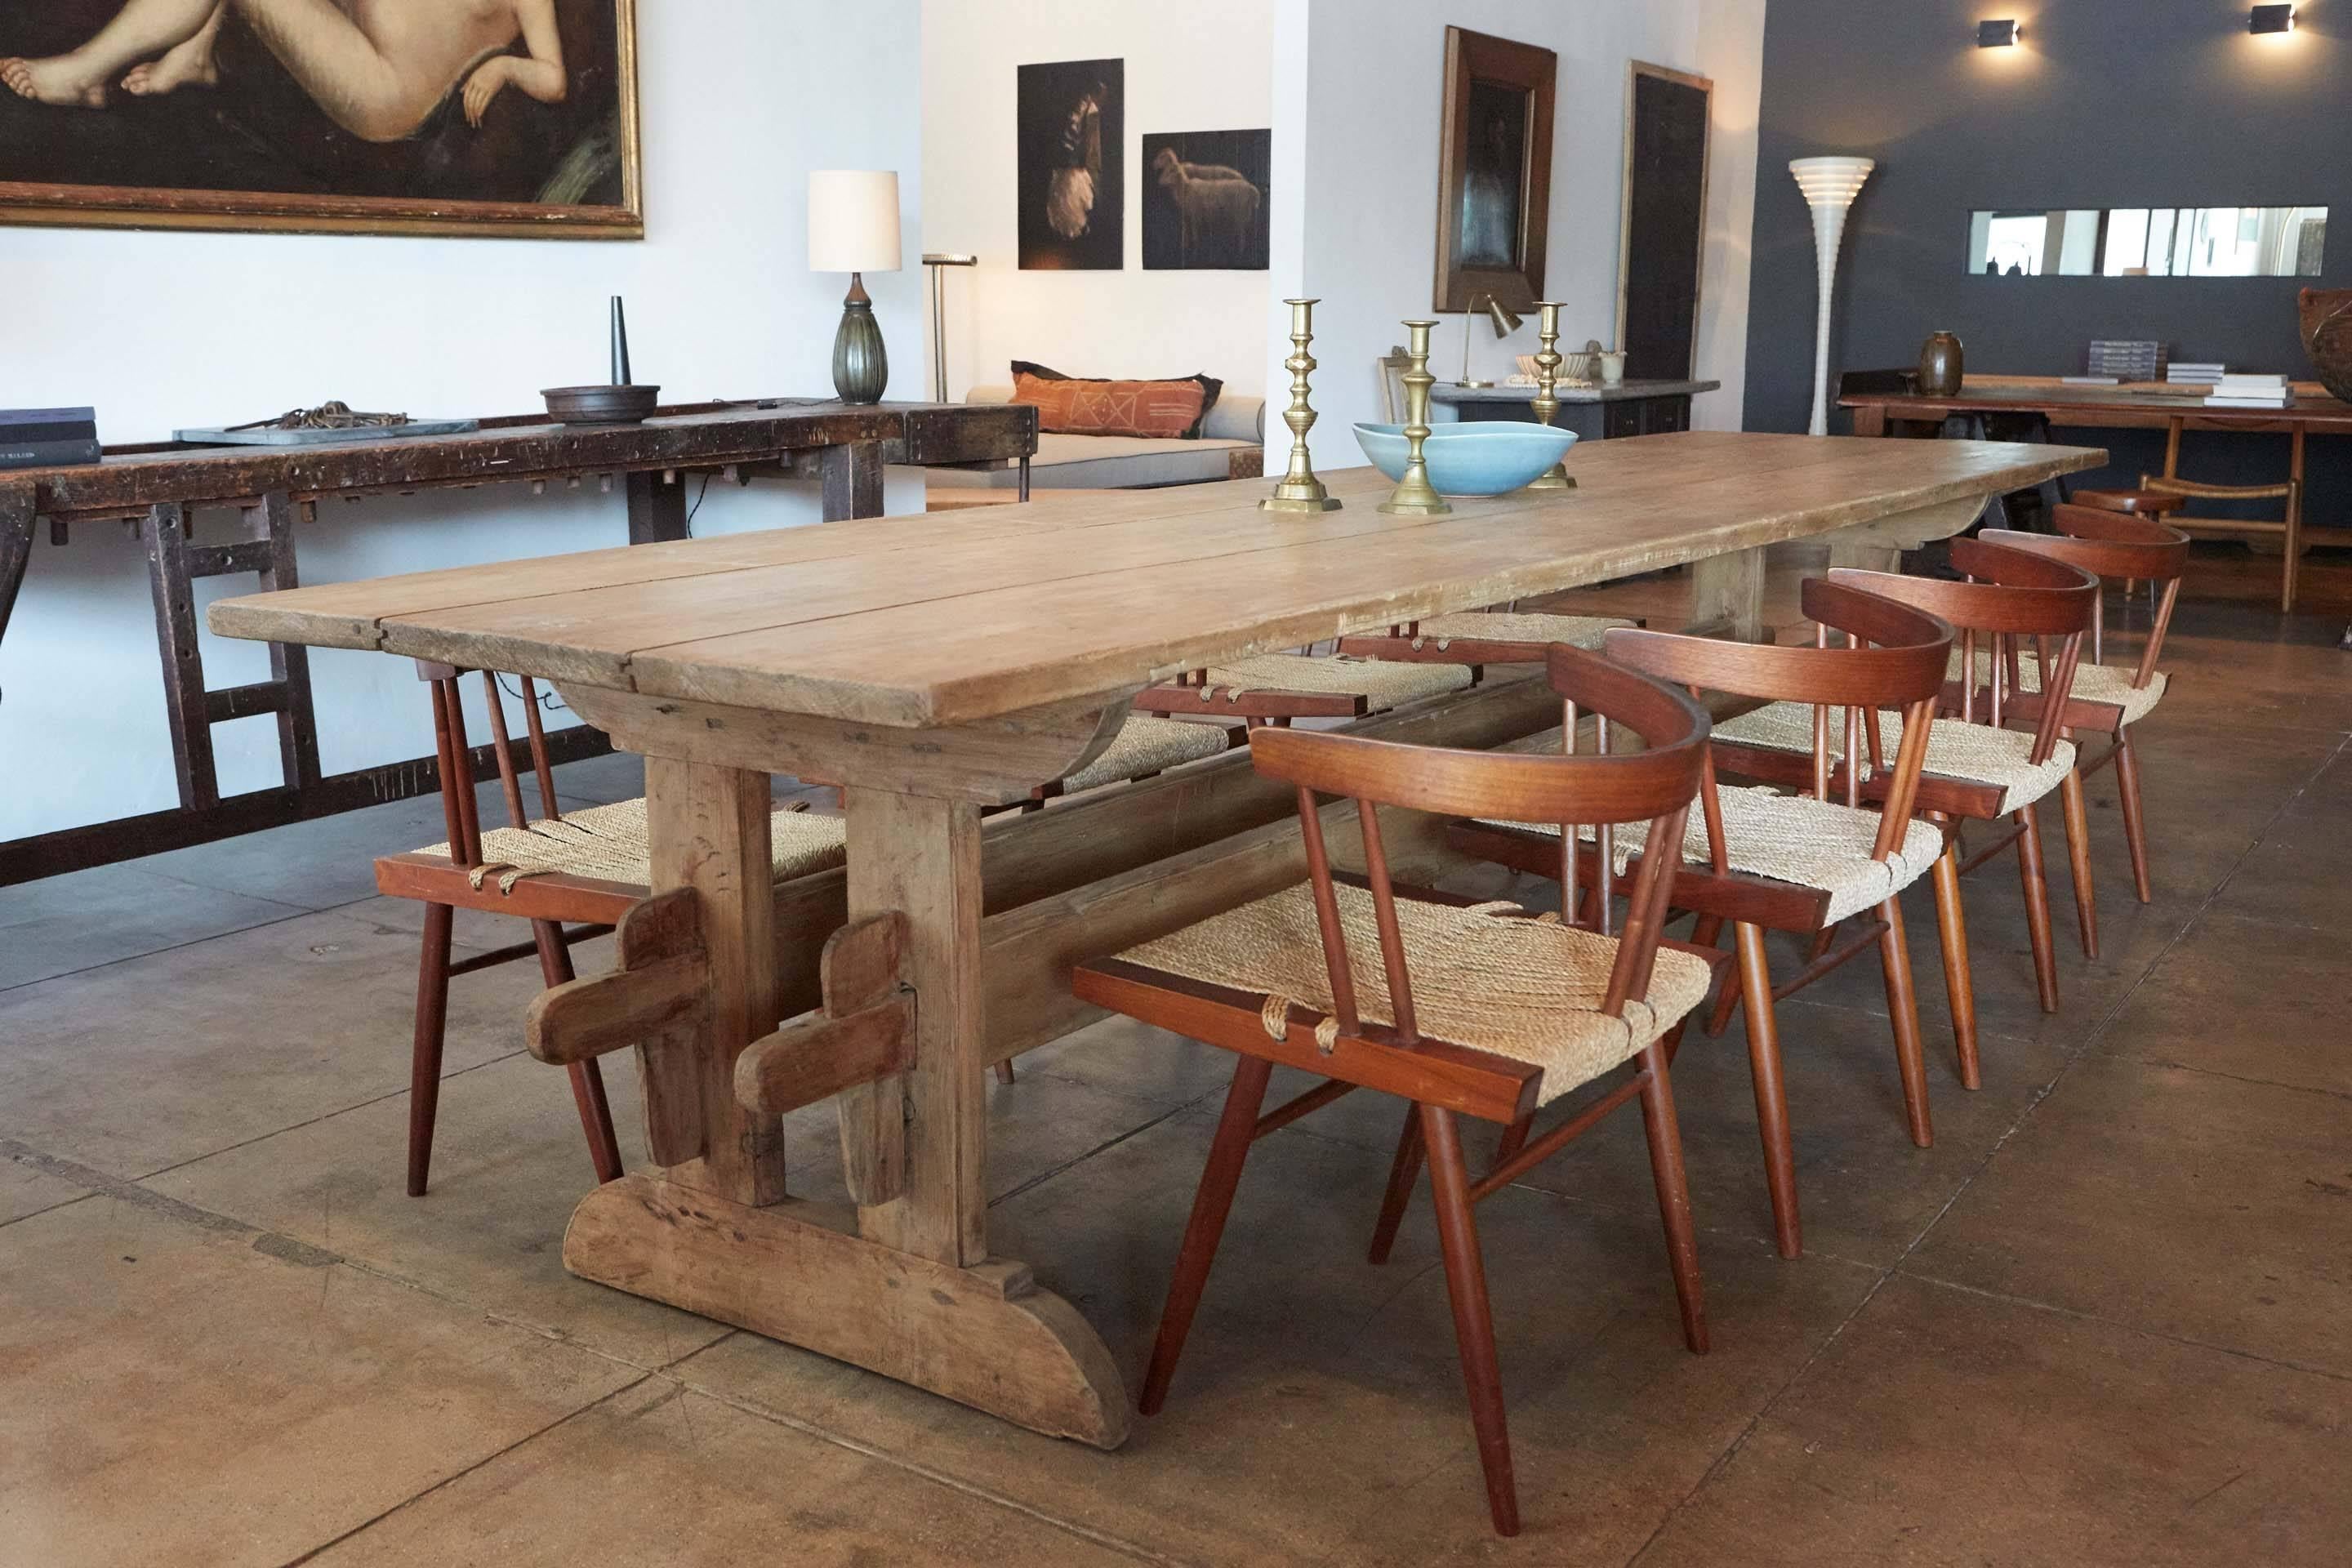 Originally used as a work or hall table but perfectly proportioned for dining or console. The table had to be completely re-doweled and properly strengthened upon arrival. The double stretchers are something we rarely see.